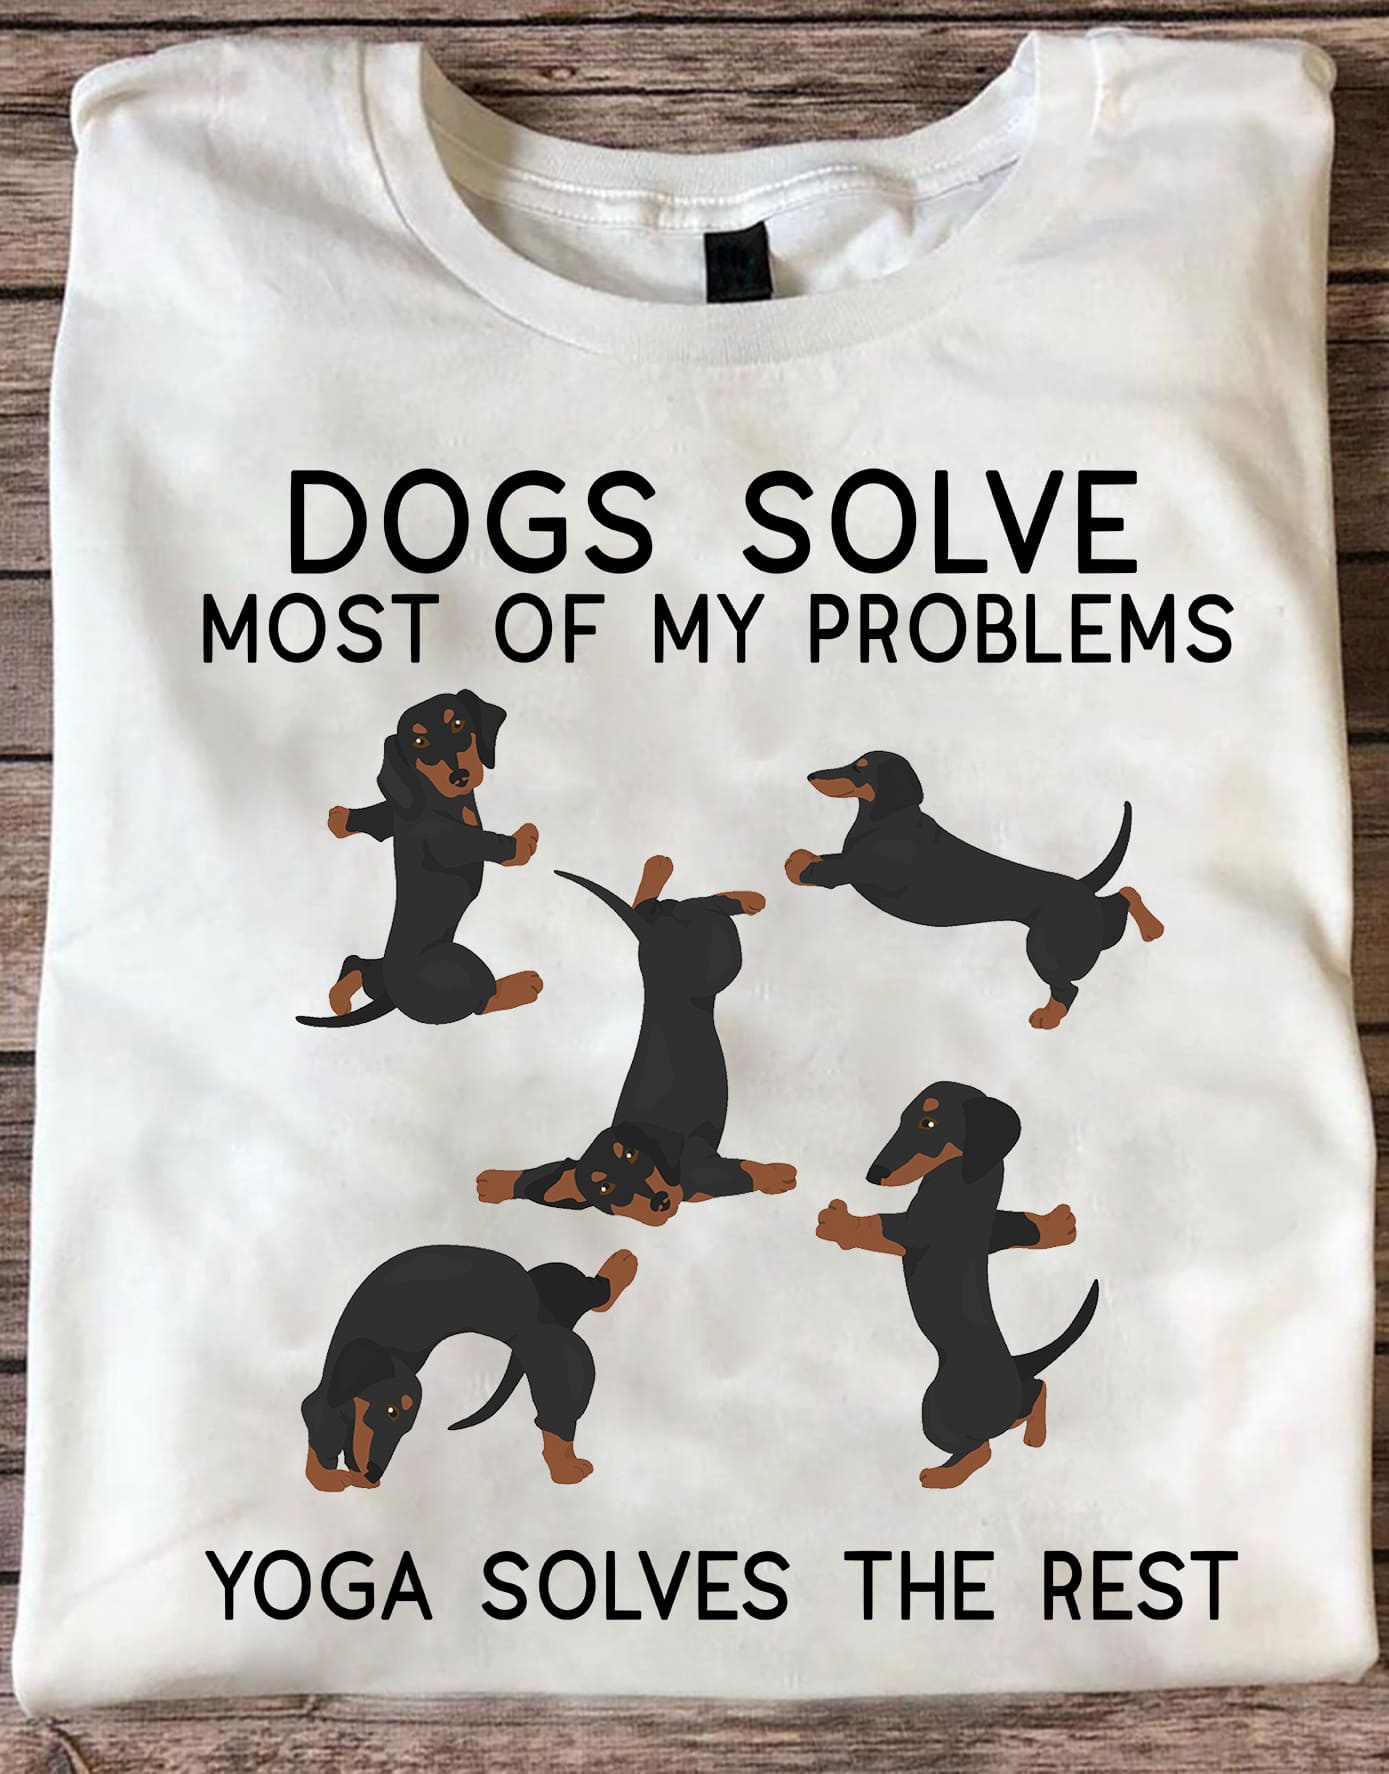 Dogs solve most of my problems, yoga solves the rest - Dachshunds doing yoga, gift for dog lover